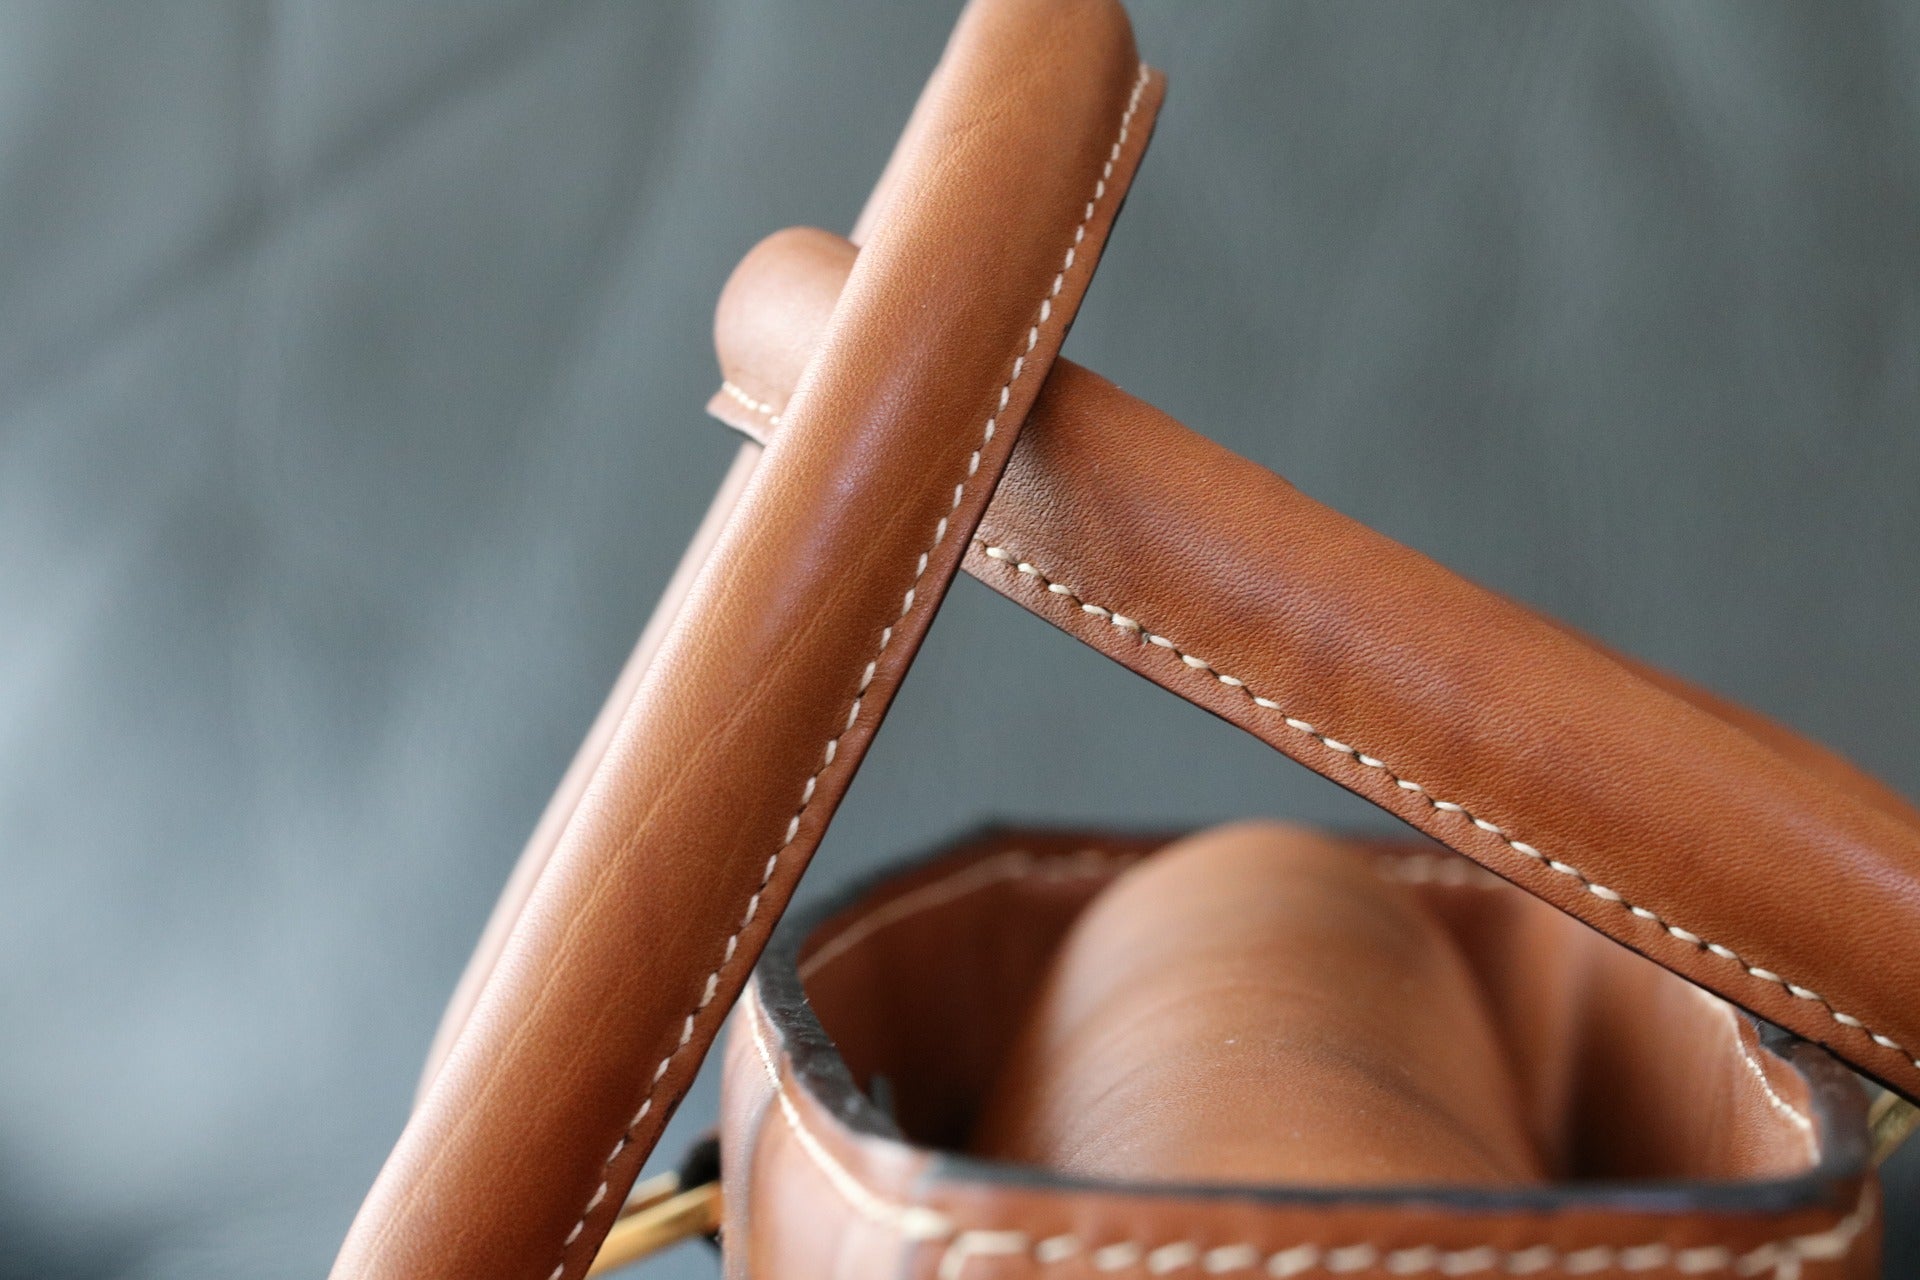 Close up of luxury leather bag handle